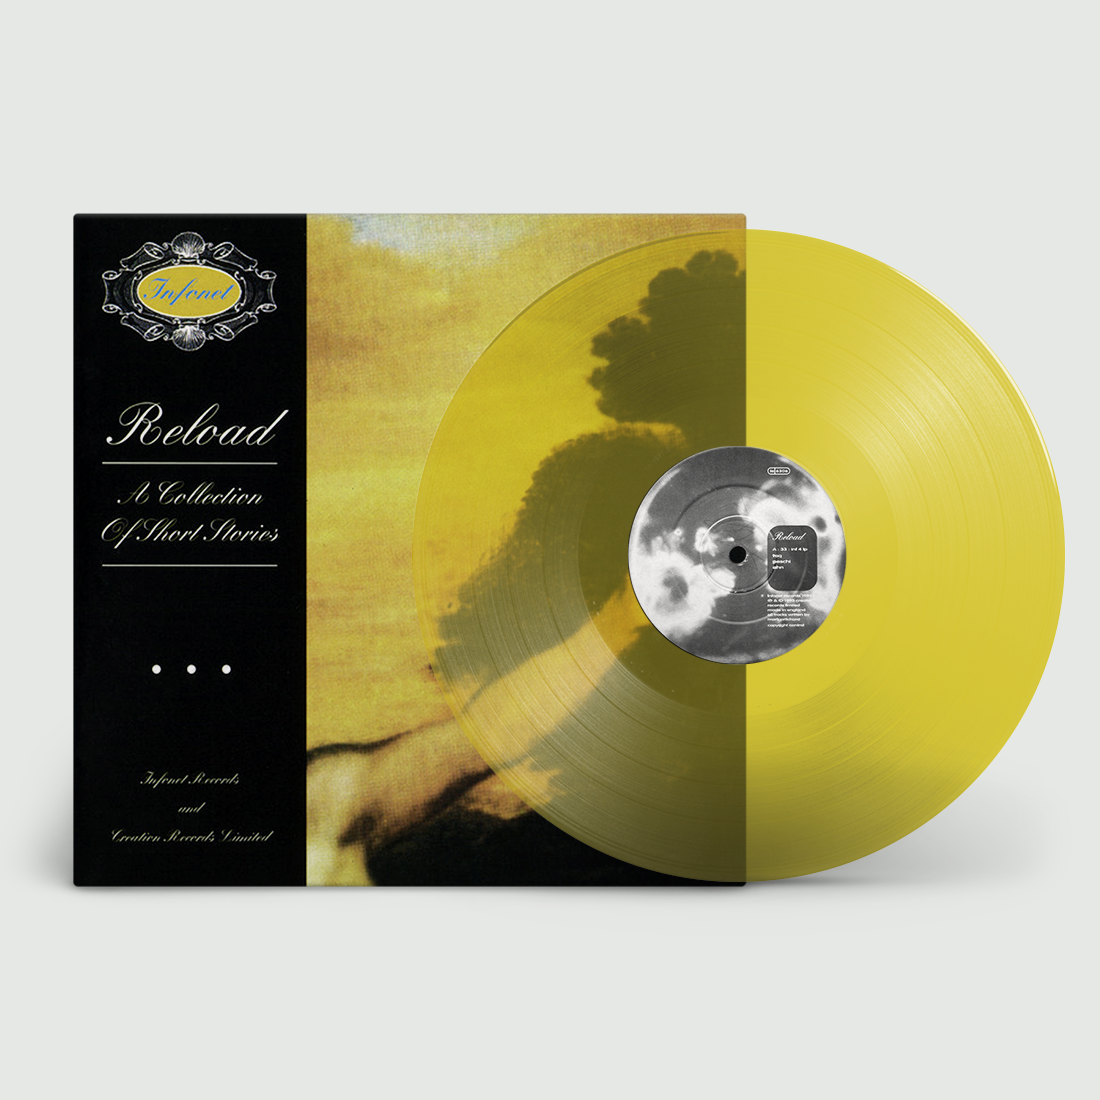 A Collection of Short Stories: Limited Edition Translucent Yellow Vinyl 2LP